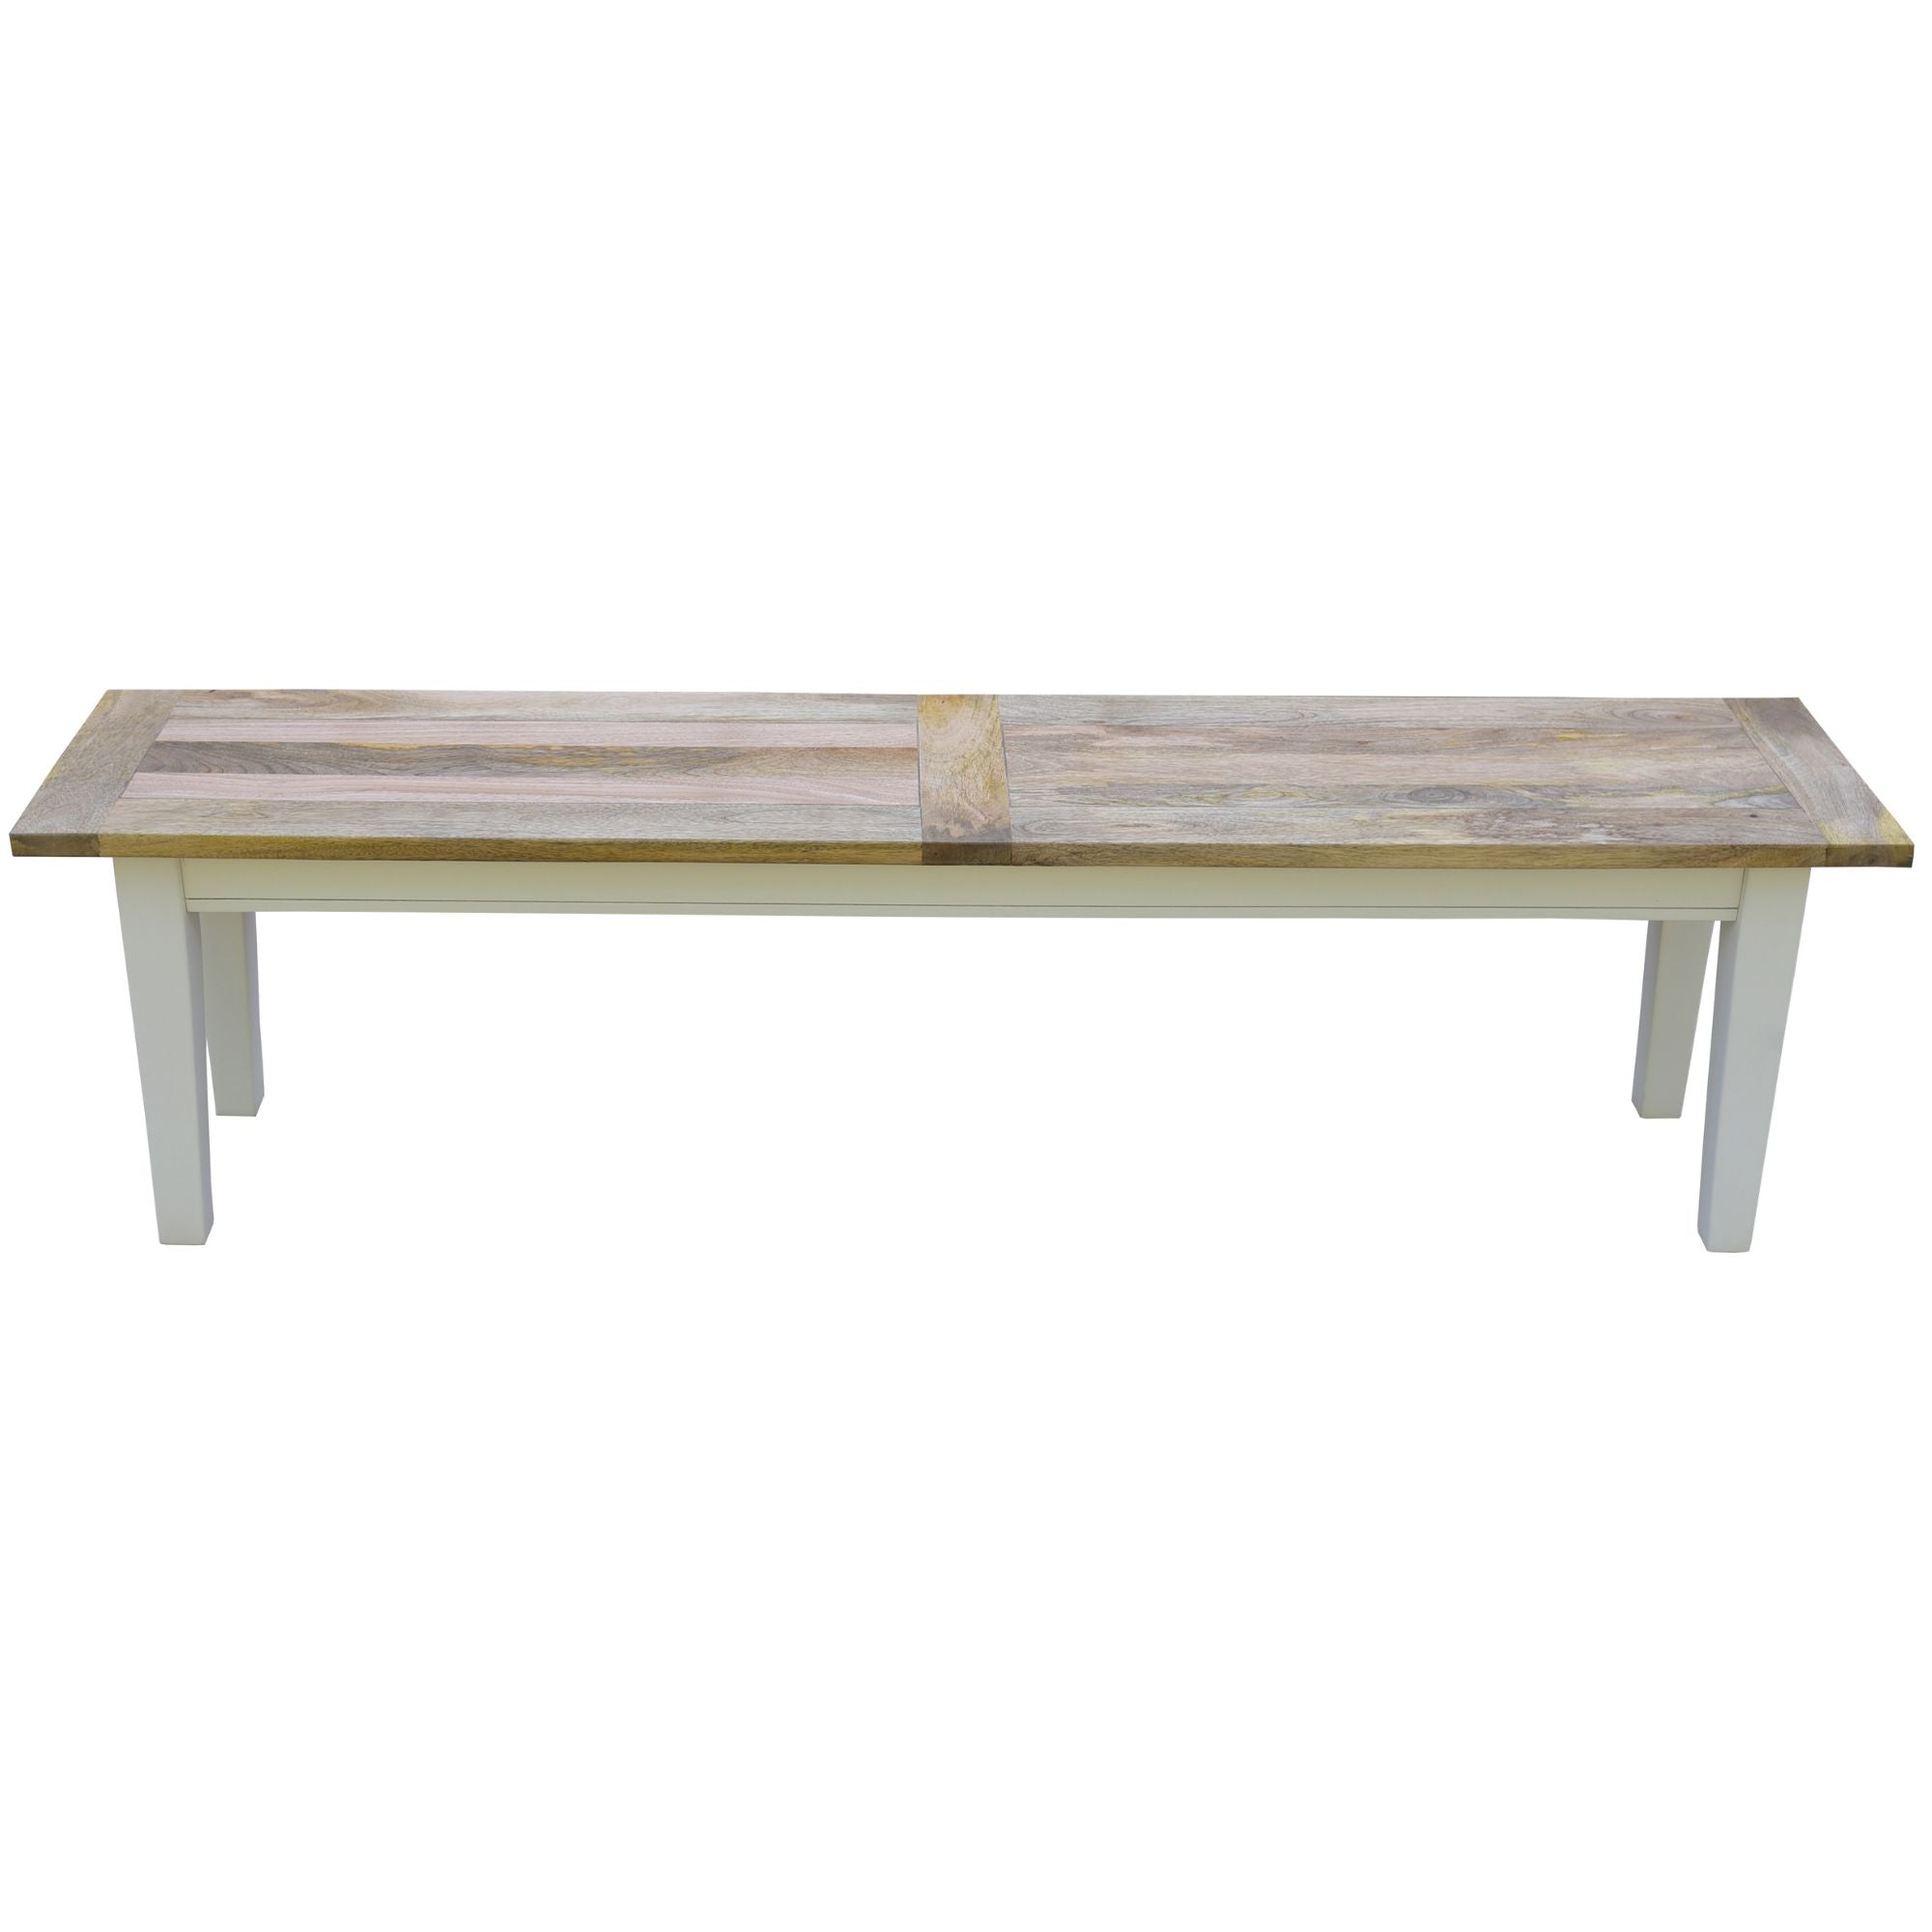 Dining Bench Seat 130Cm Mango Wood French Provincial Furniture